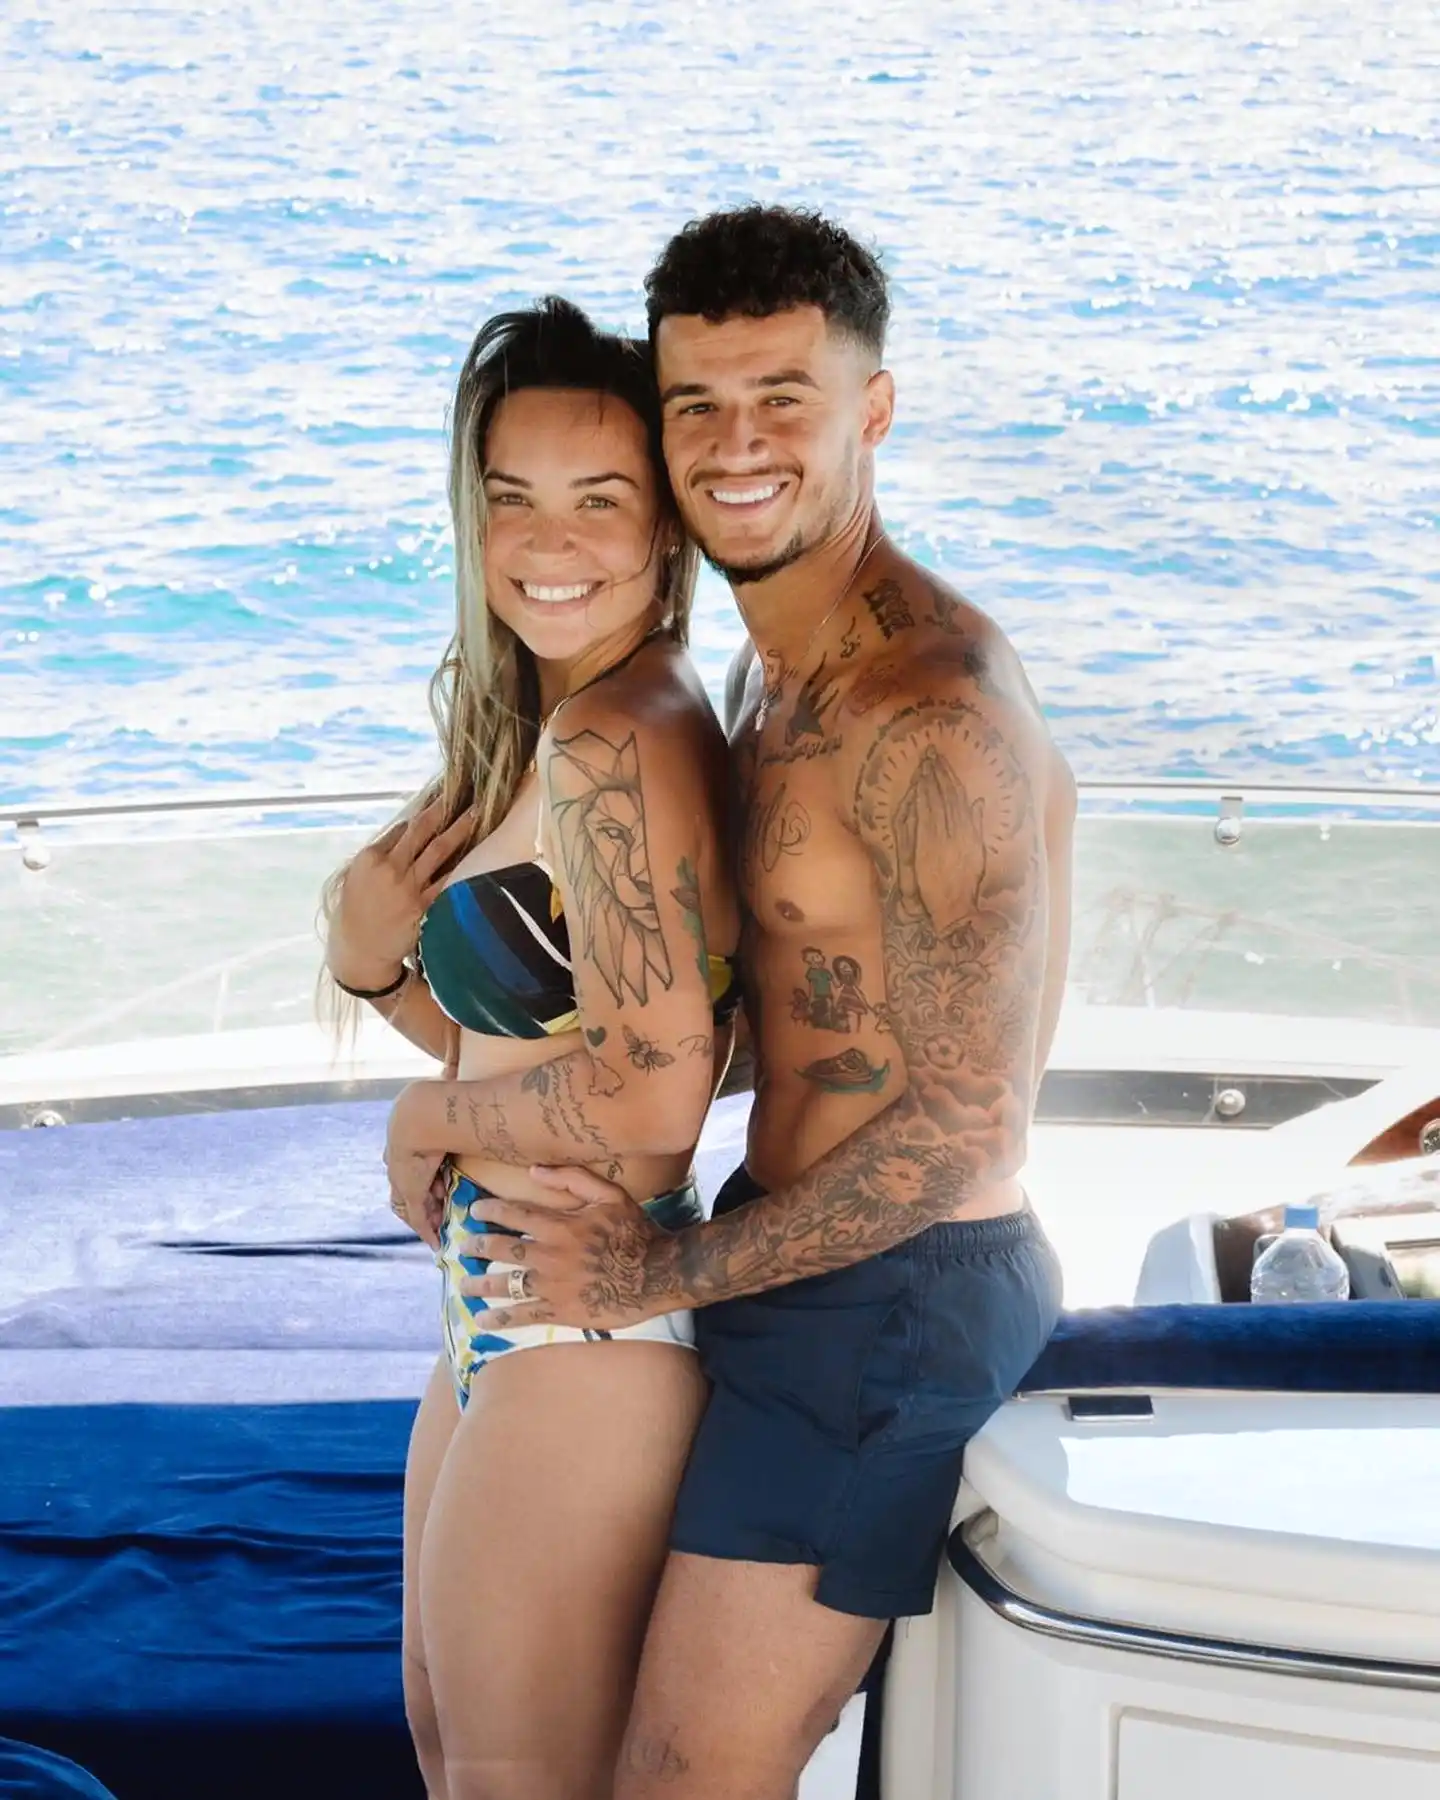 Philippe Coutinho's Wife: All You Need To Know About Aine Coutinho